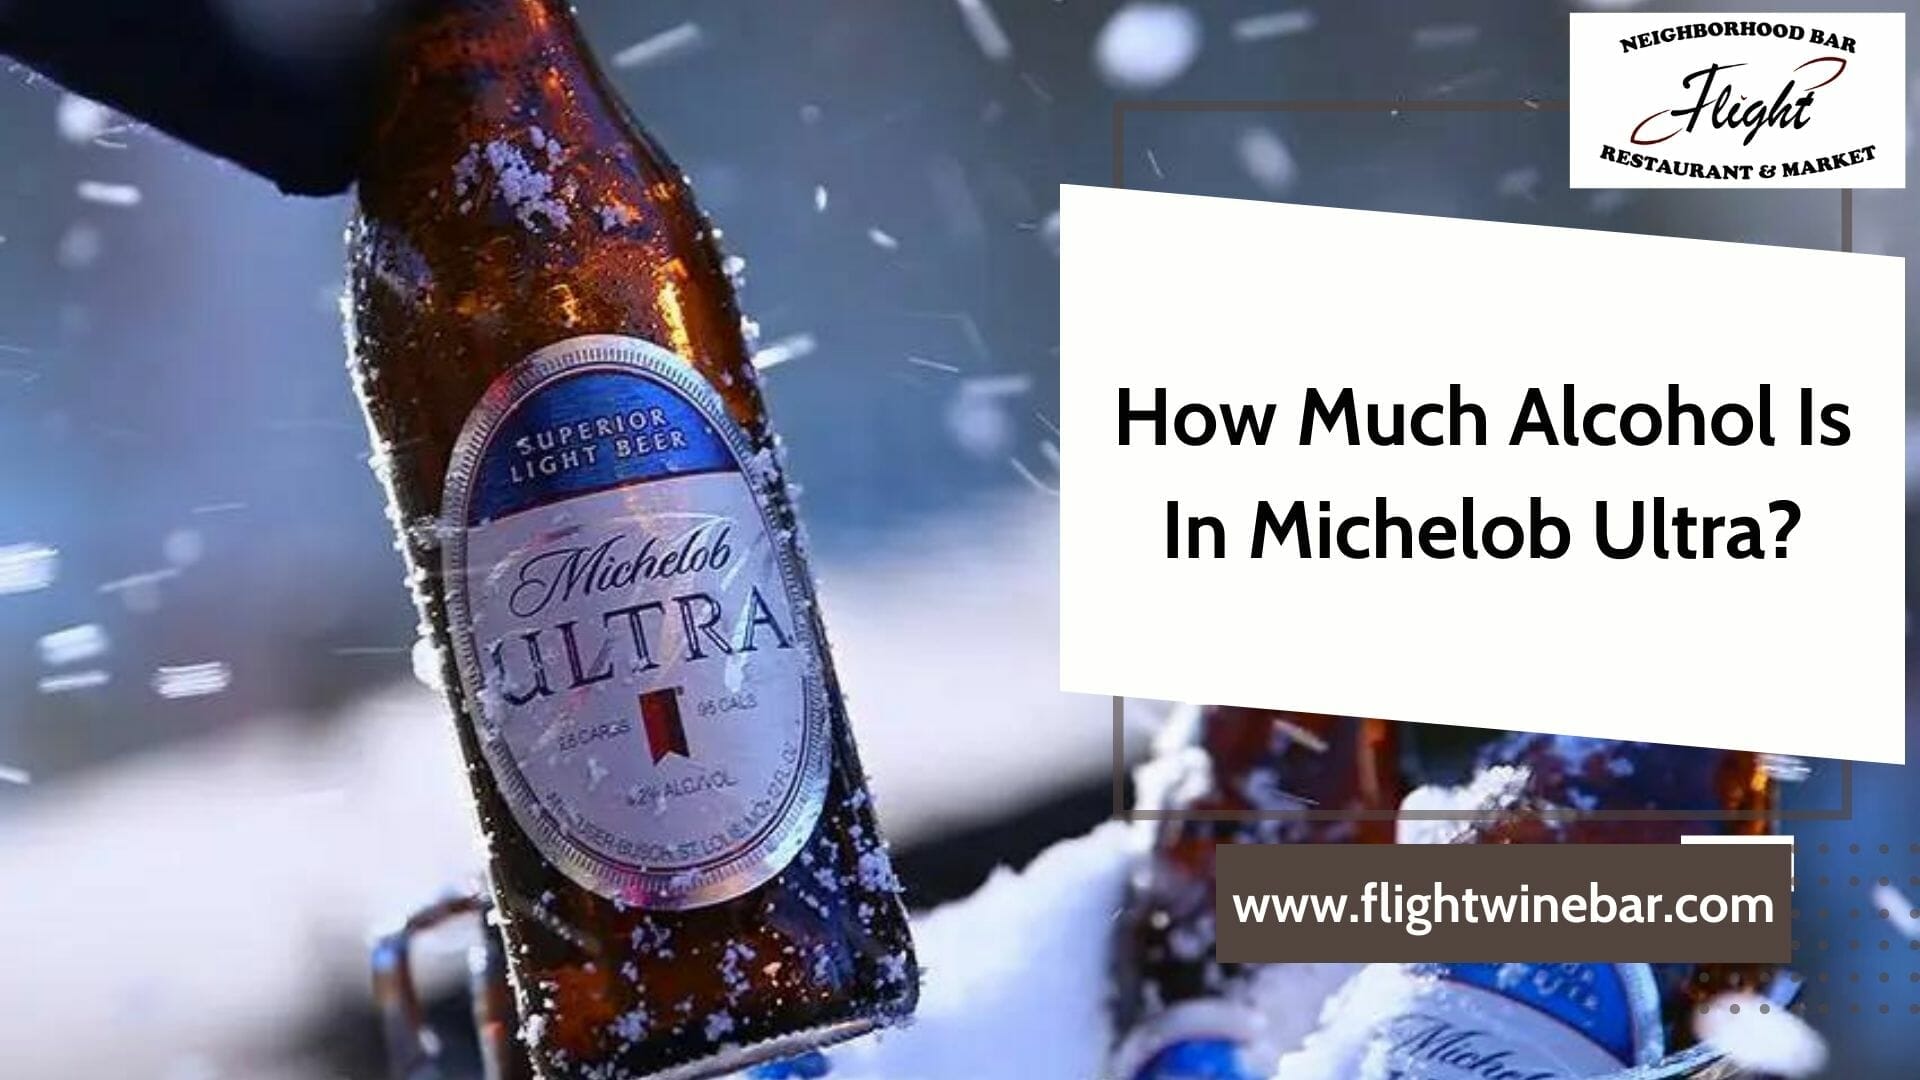 How Much Alcohol Is In Michelob Ultra